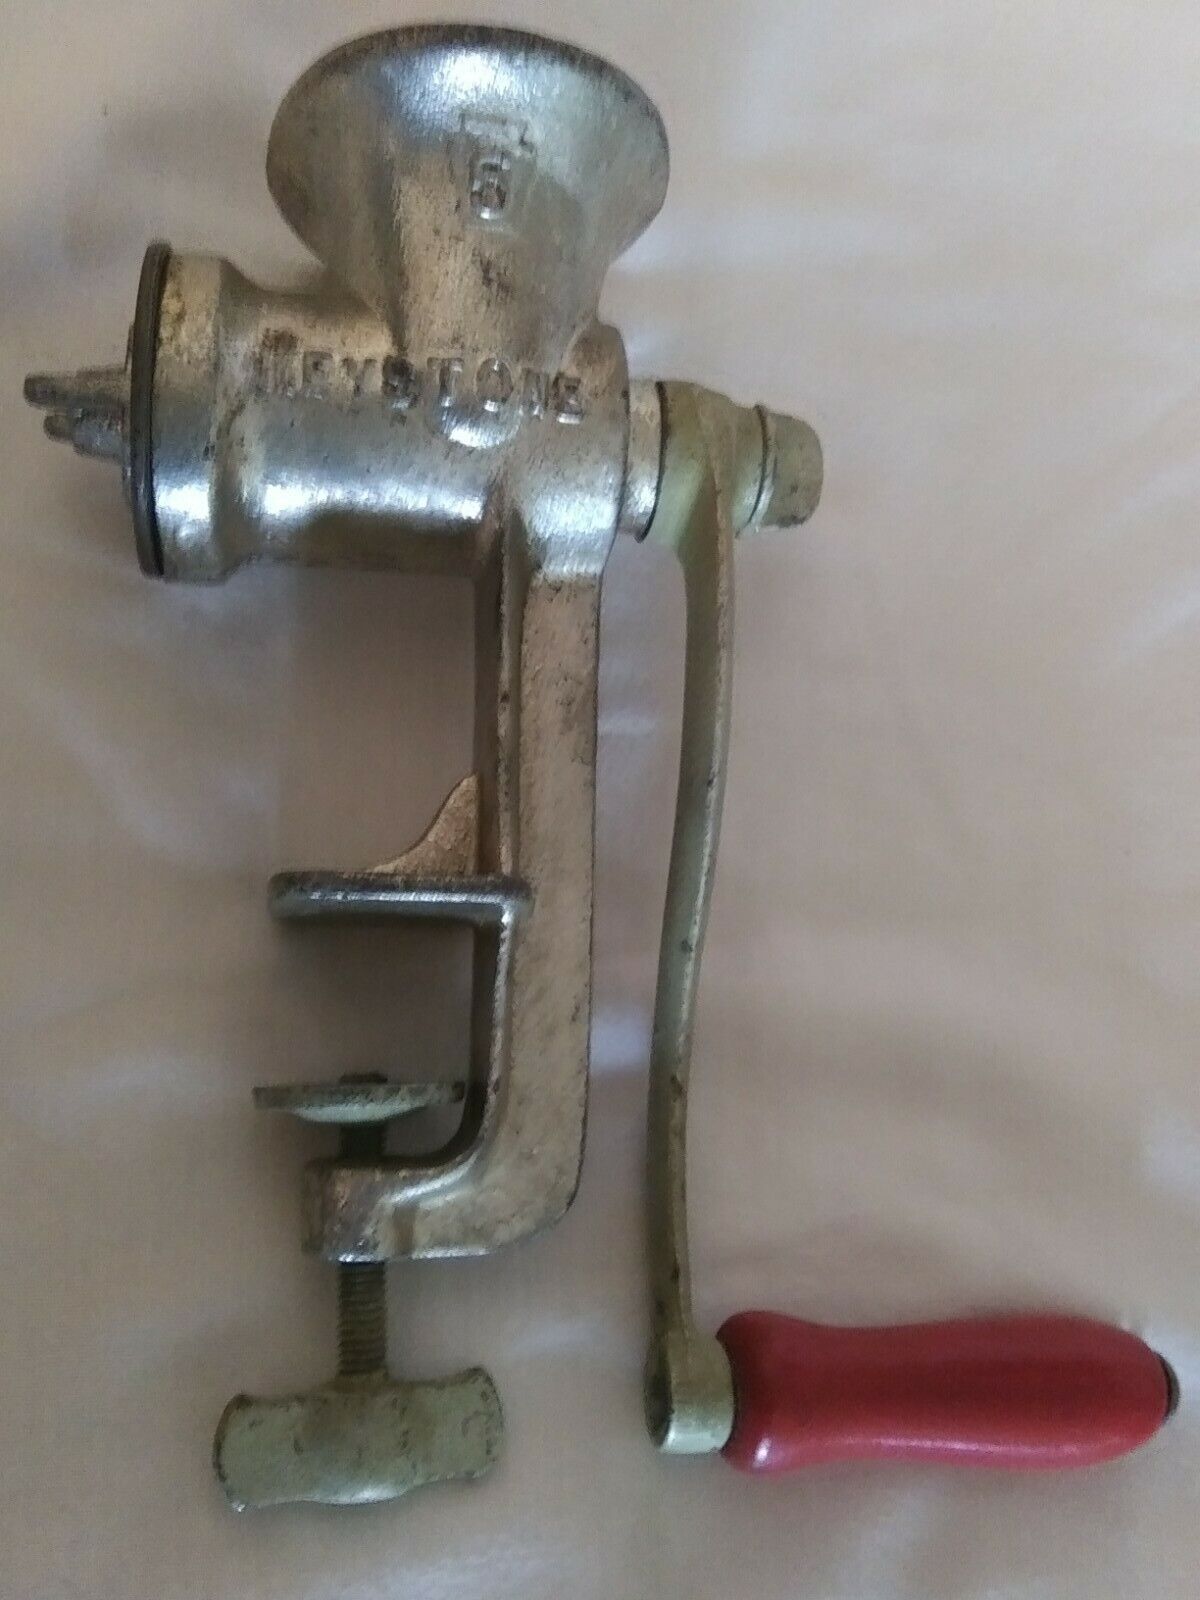 VINTAGE KEYSTONE #5 MEAT GRINDER CAST IRON SMALL SIZE Excellent Condition